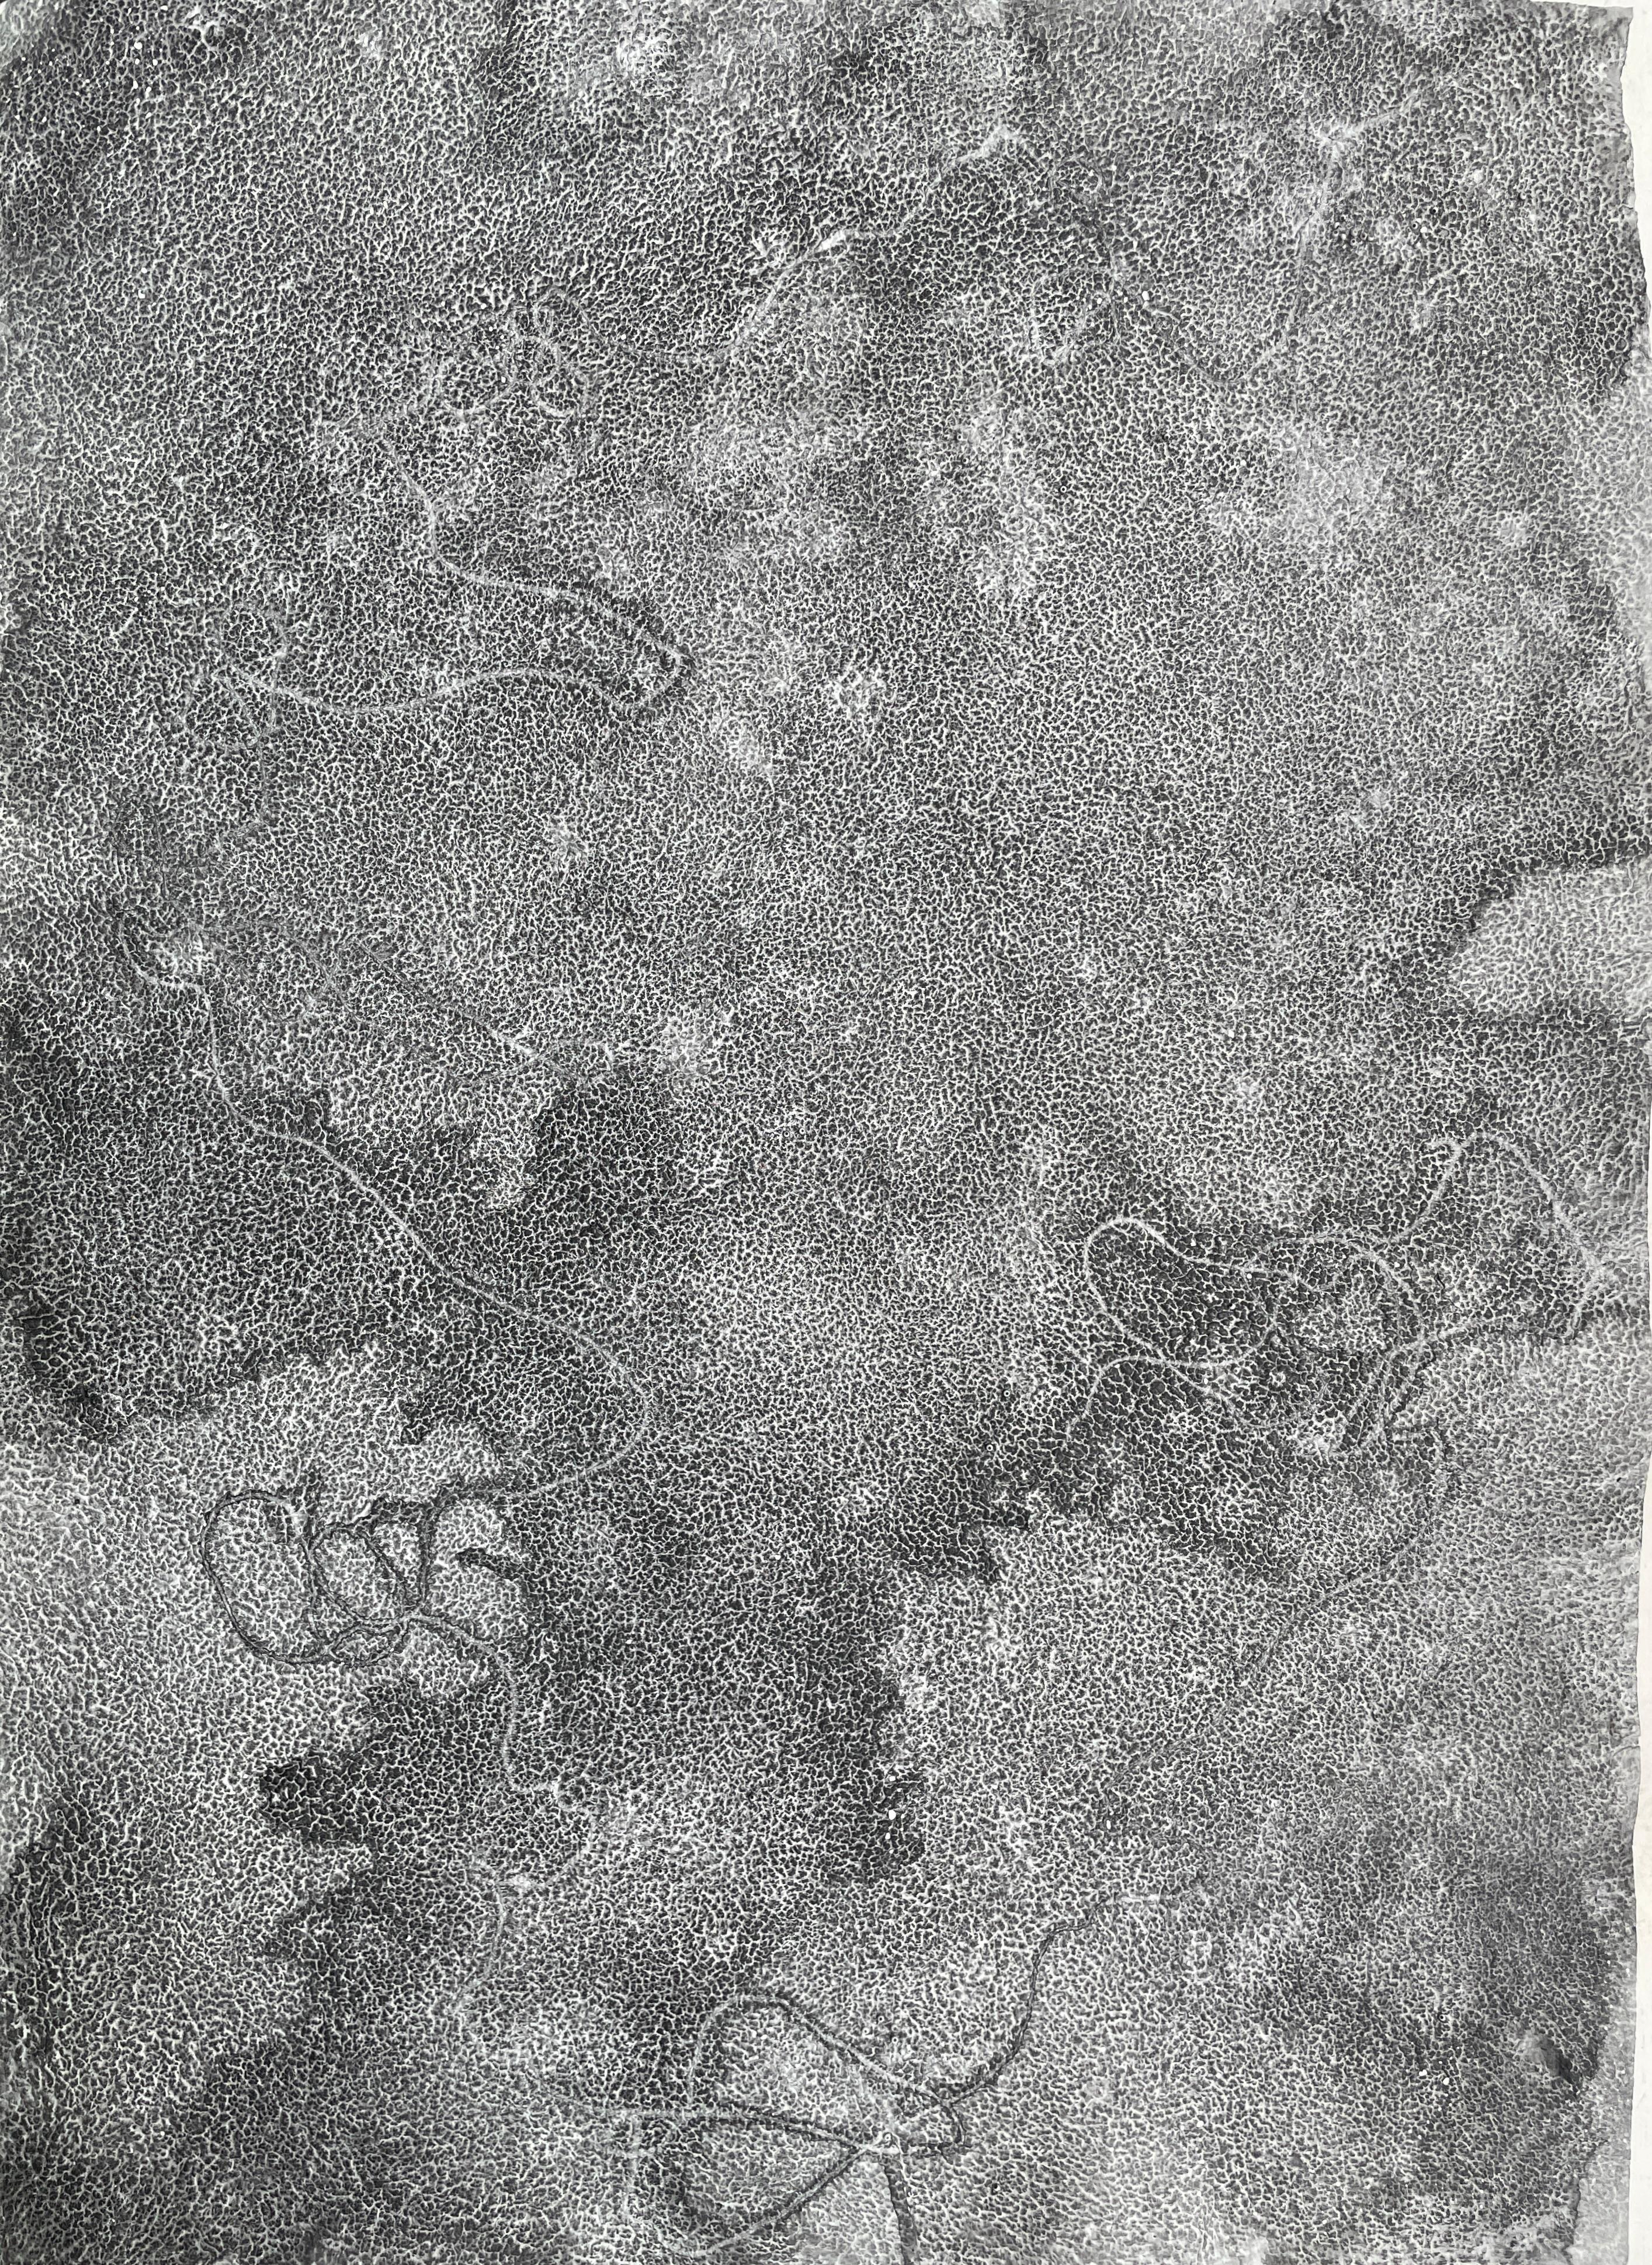 Cincuenta 1: sumi ink painting on handmade paper from India: gray, black & white